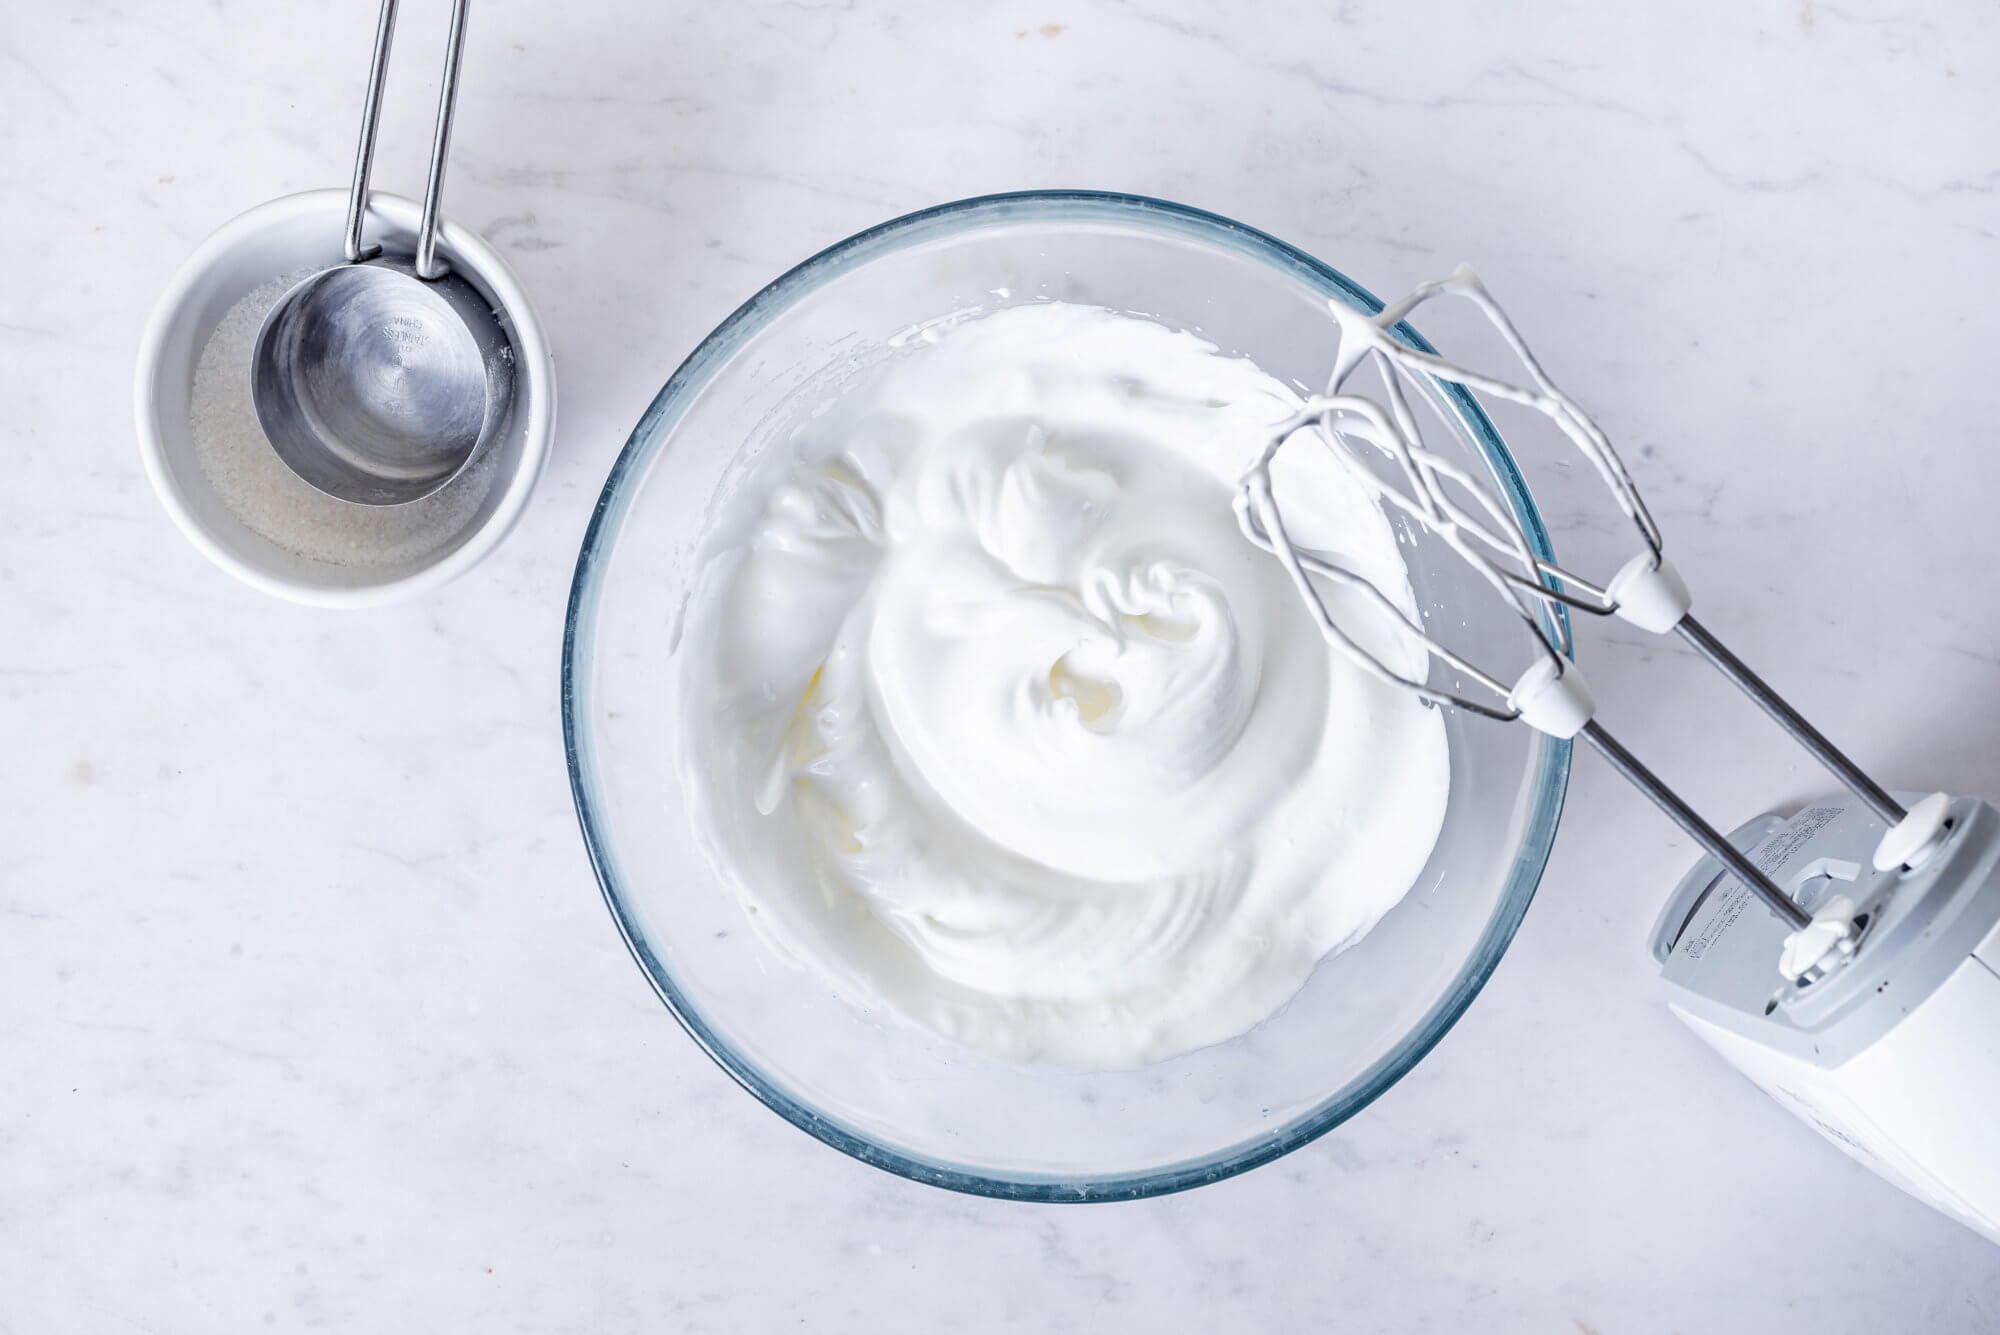 whipped-egg-whites-in-a-glass-bowl-with-hand-mixers-and-a-white-bowl-with-a-silver-measuring-cup-on-the-side